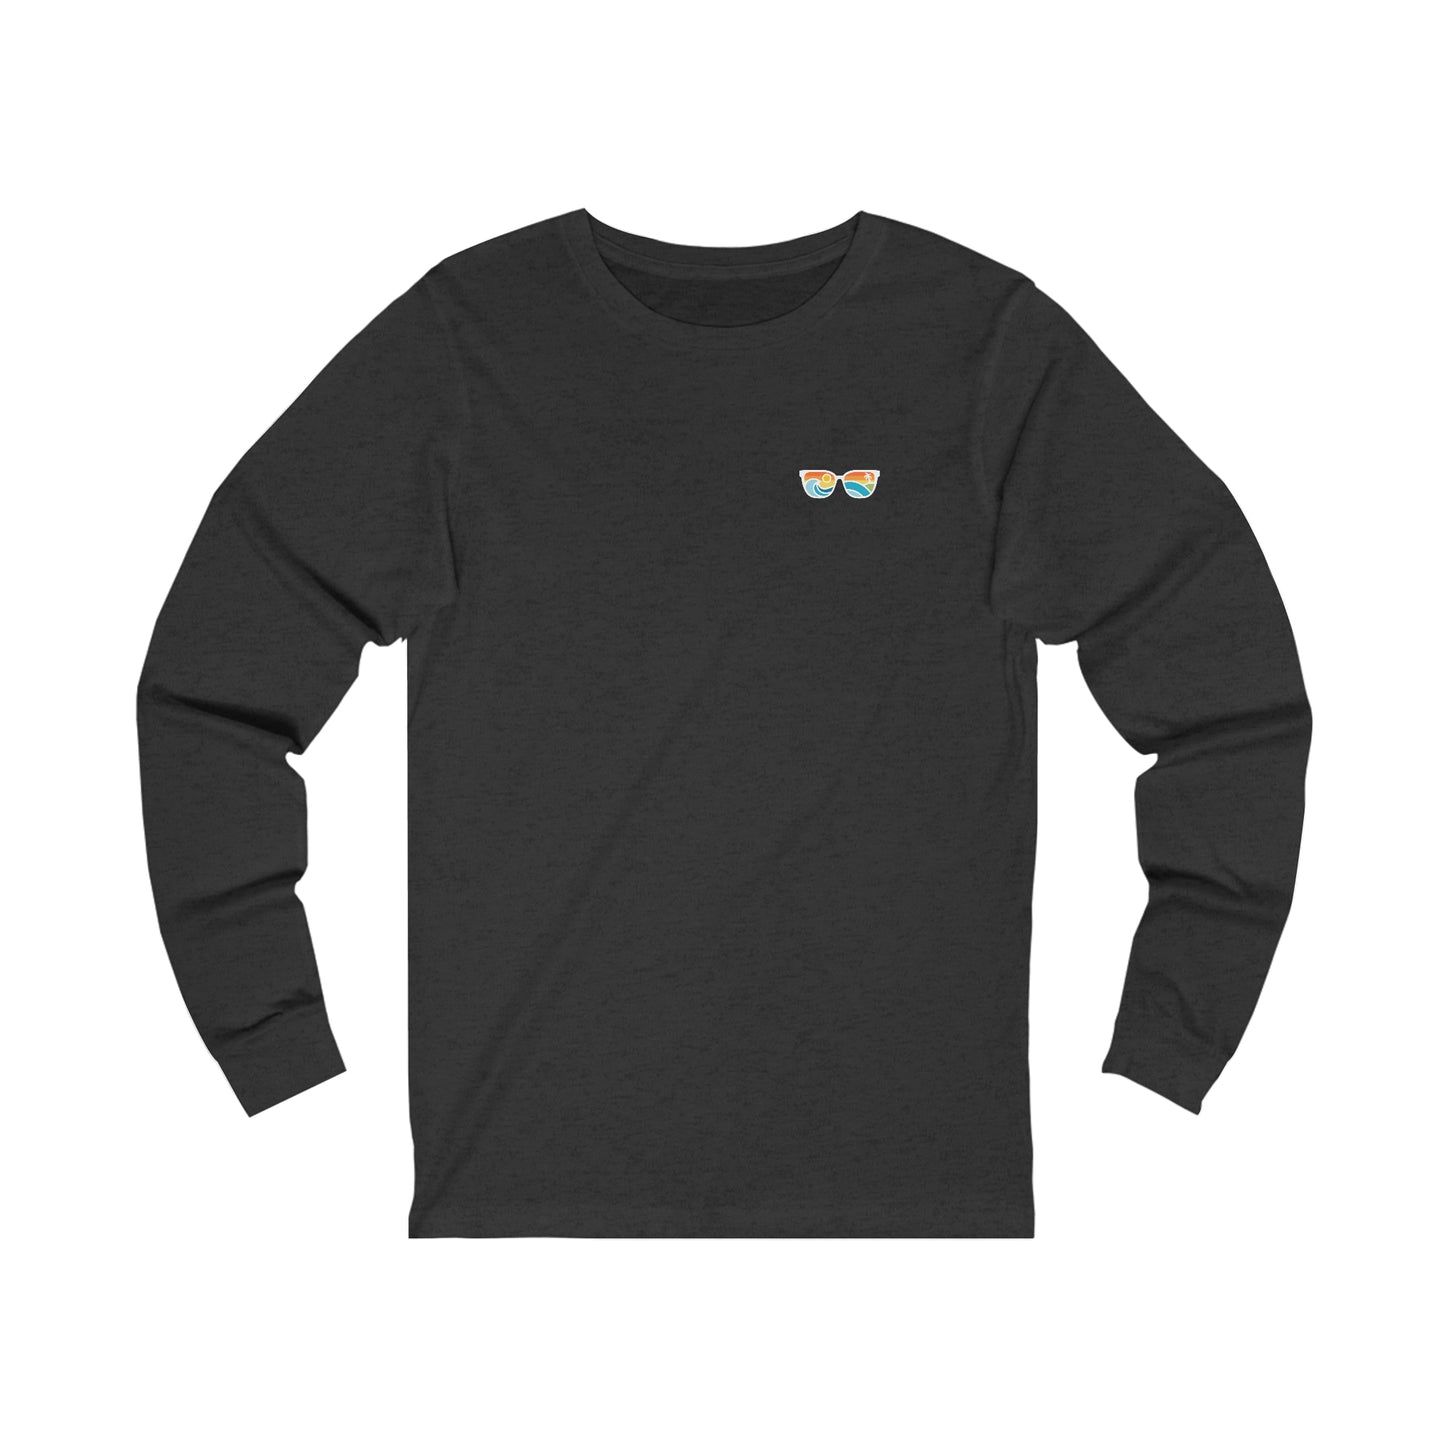 Chasing Waves in this Unisex Jersey Long Sleeve Tee